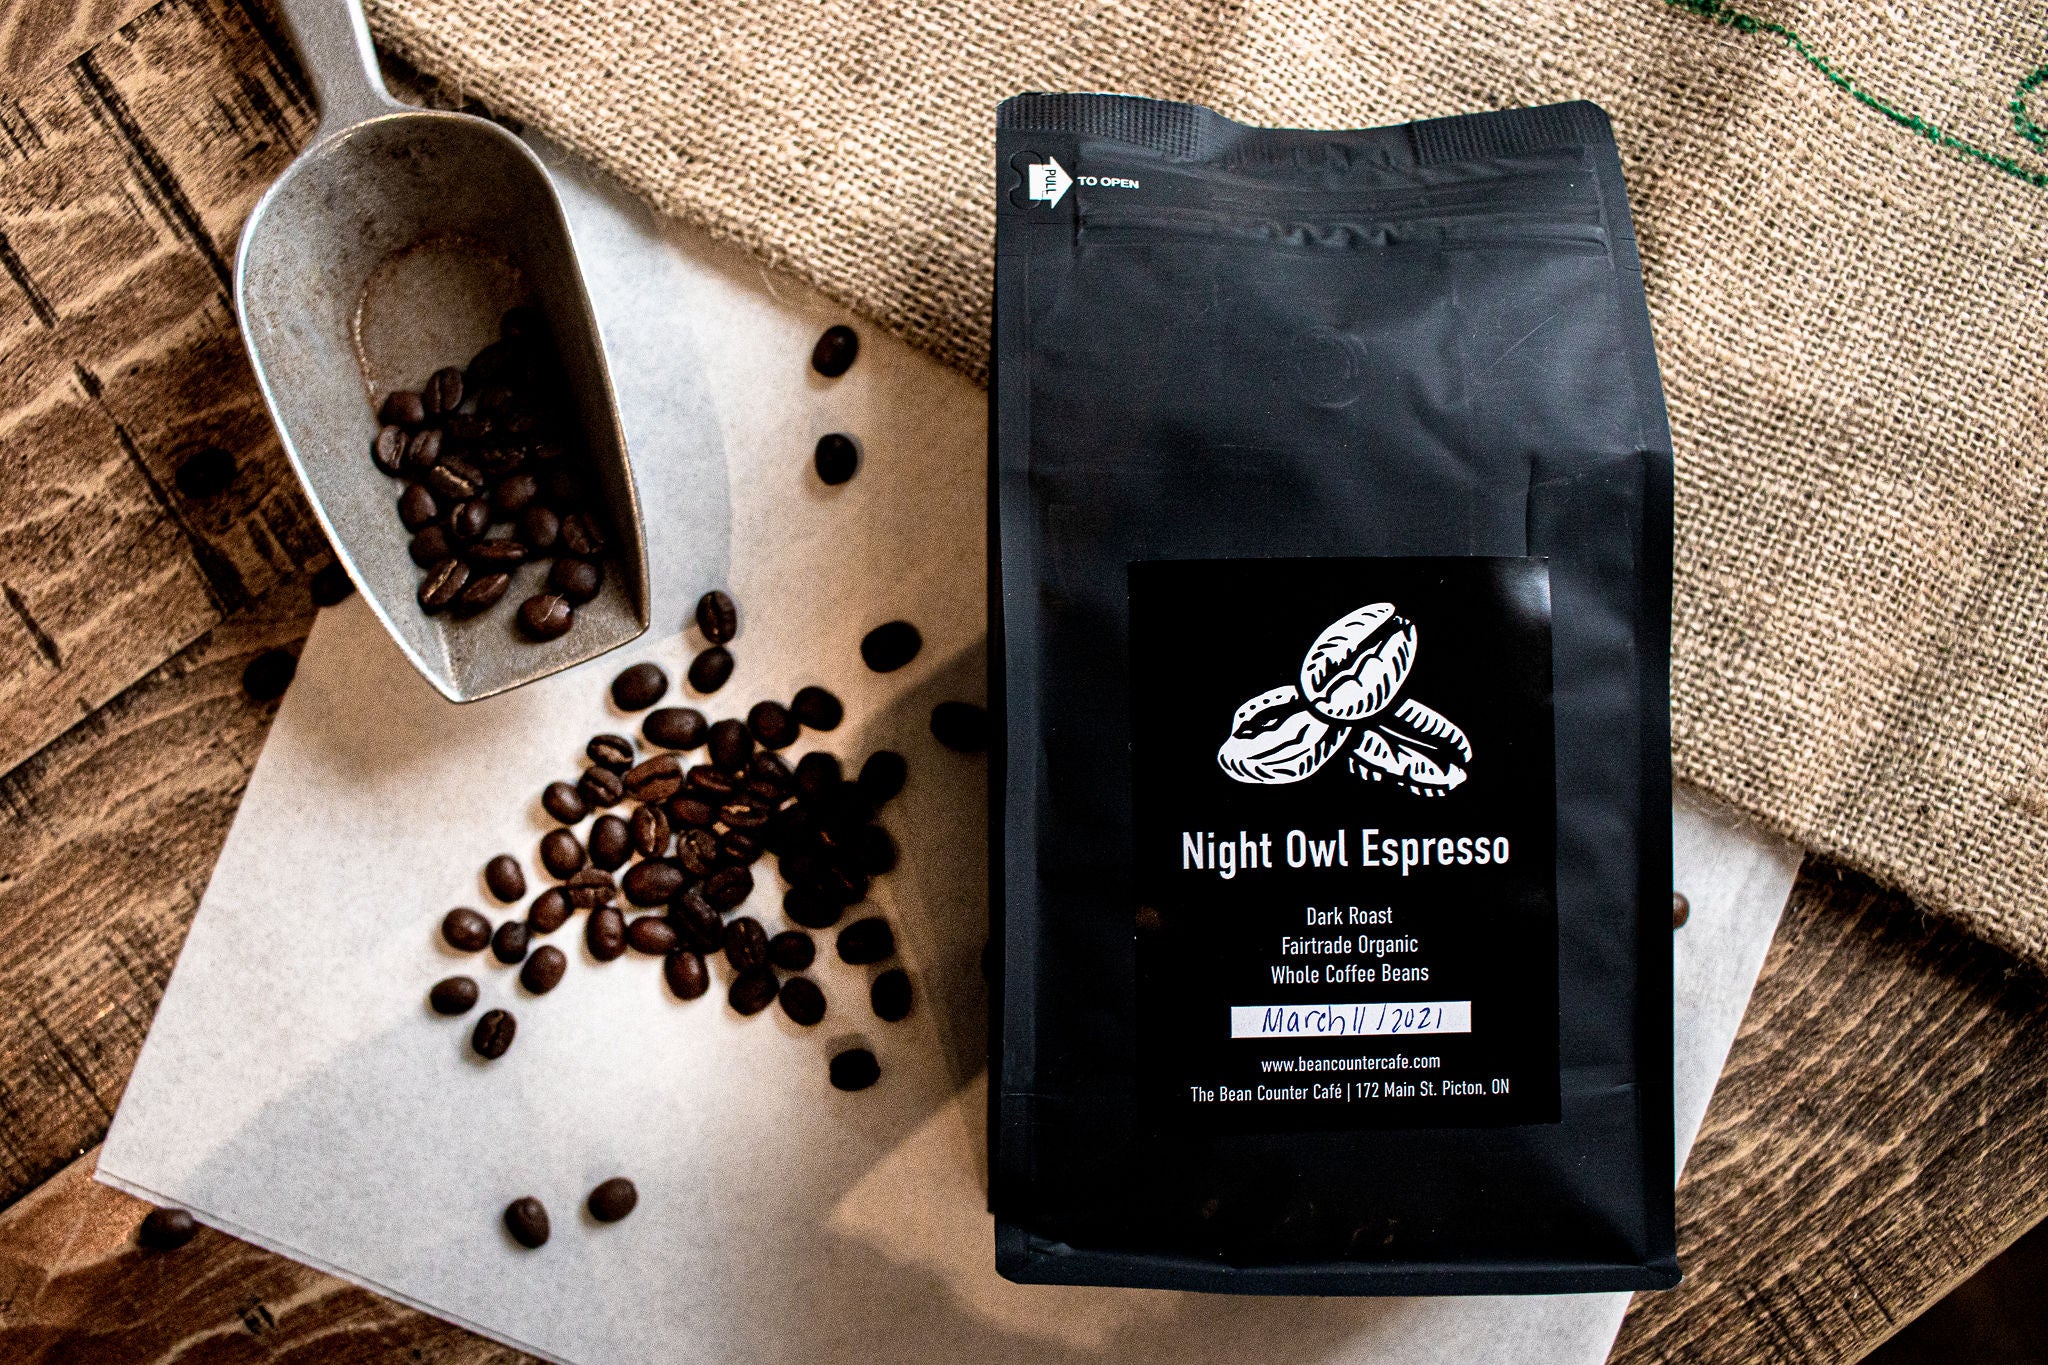 Discover our classic coffee range